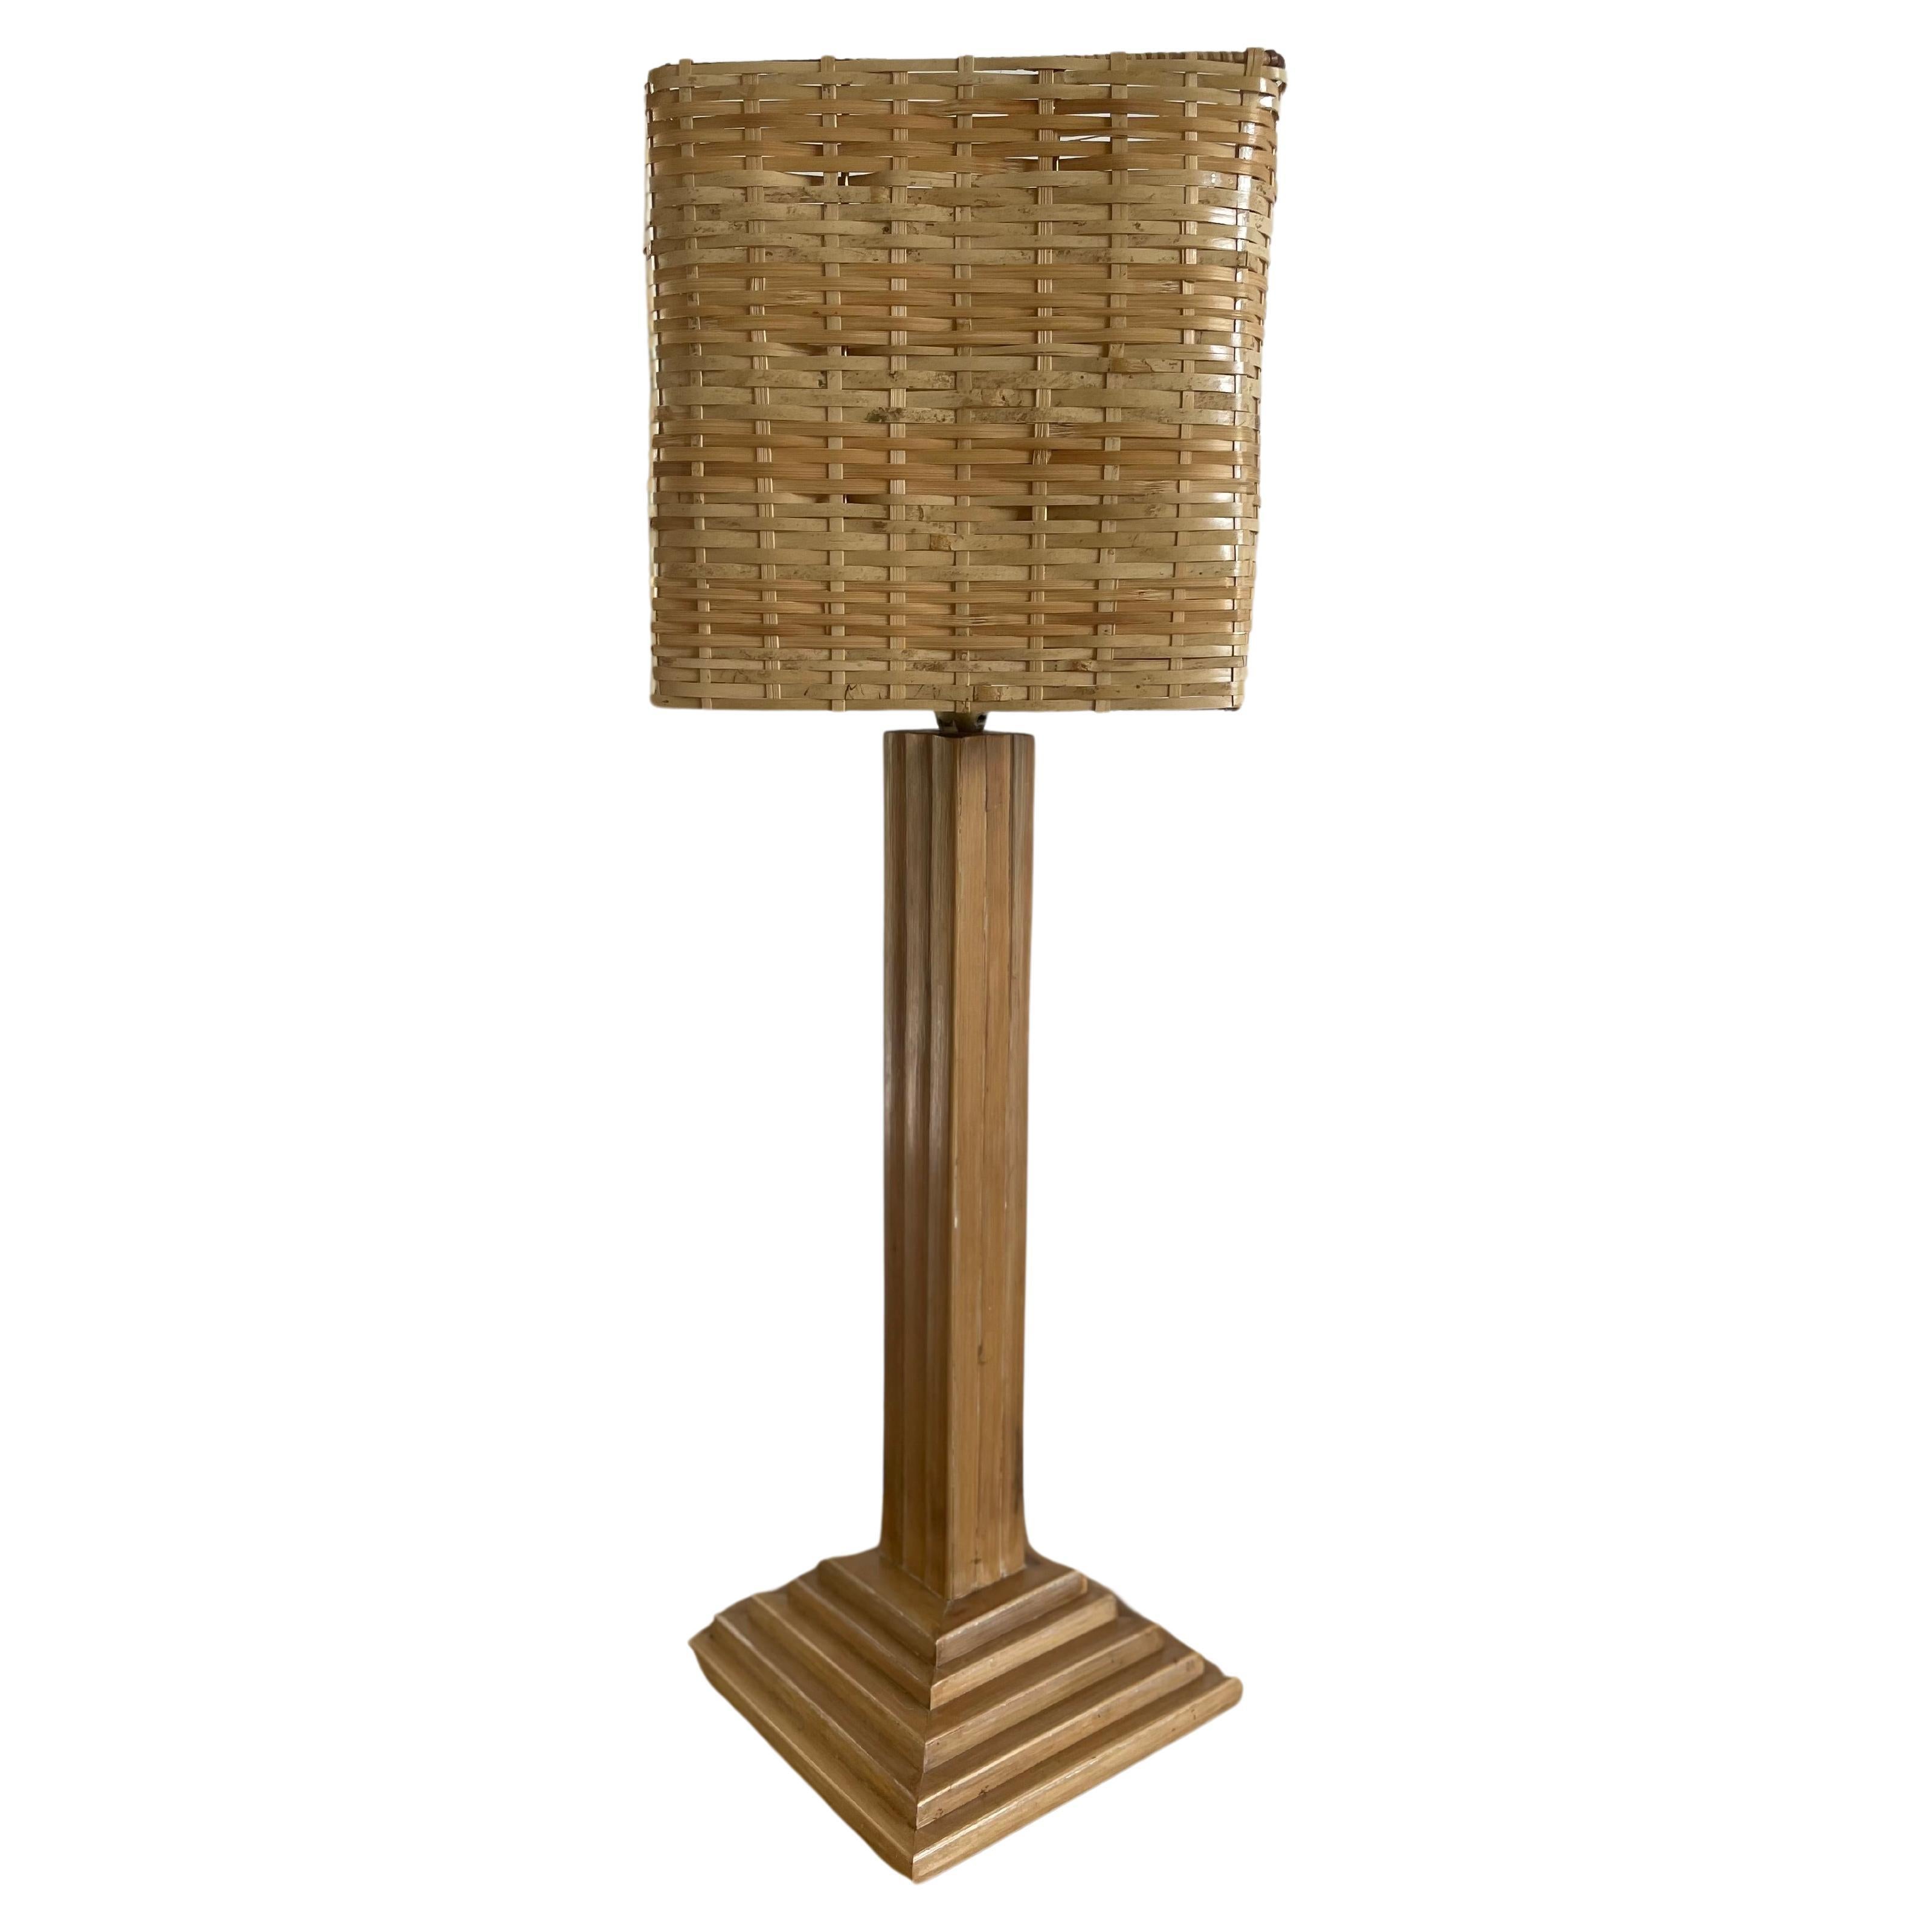 Bamboo modernist table lamp Peter Blake style